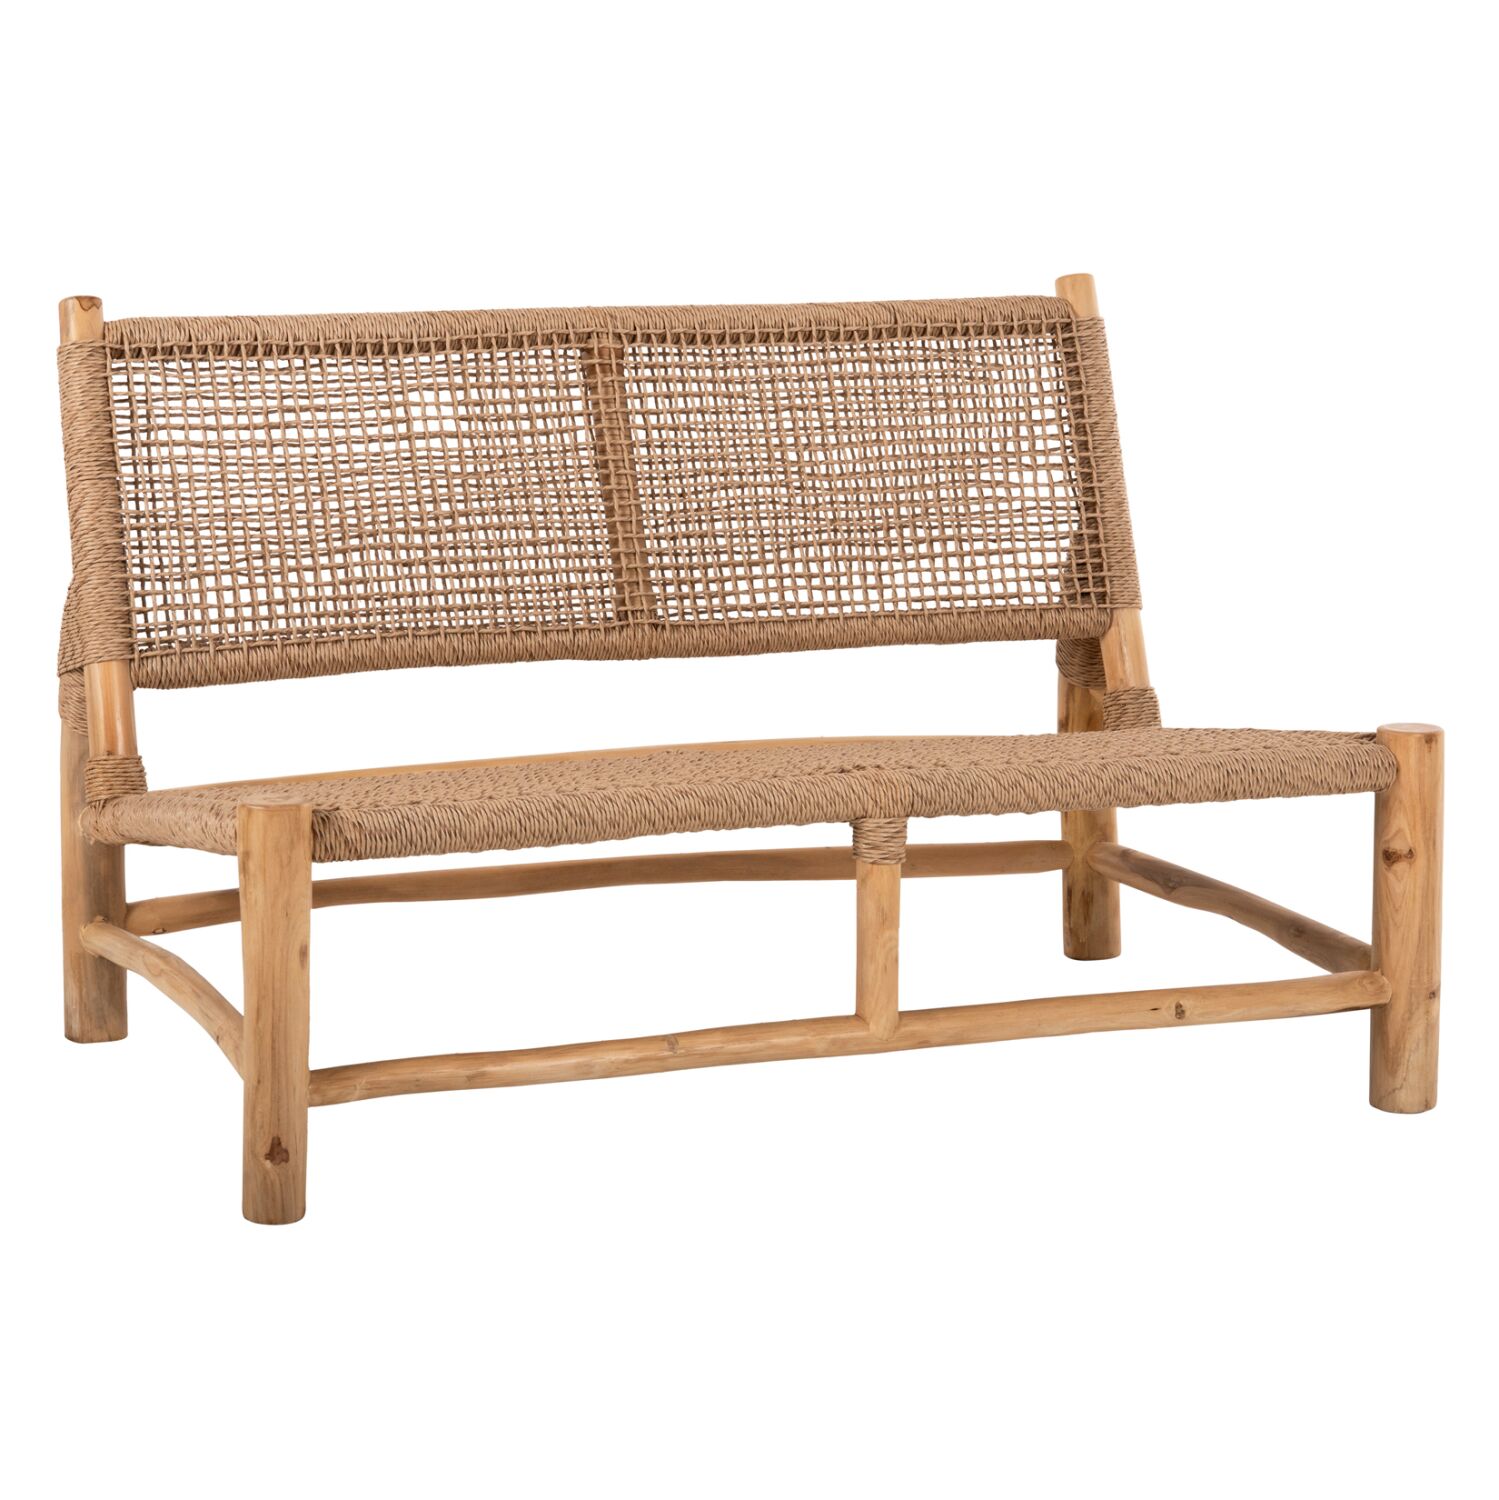 OUTDOOR SOFA 2-SEATER LONDER HM5984 TEAK WOOD AND SYNTHETIC TWISTED RATTAN 120x75x78H cm.